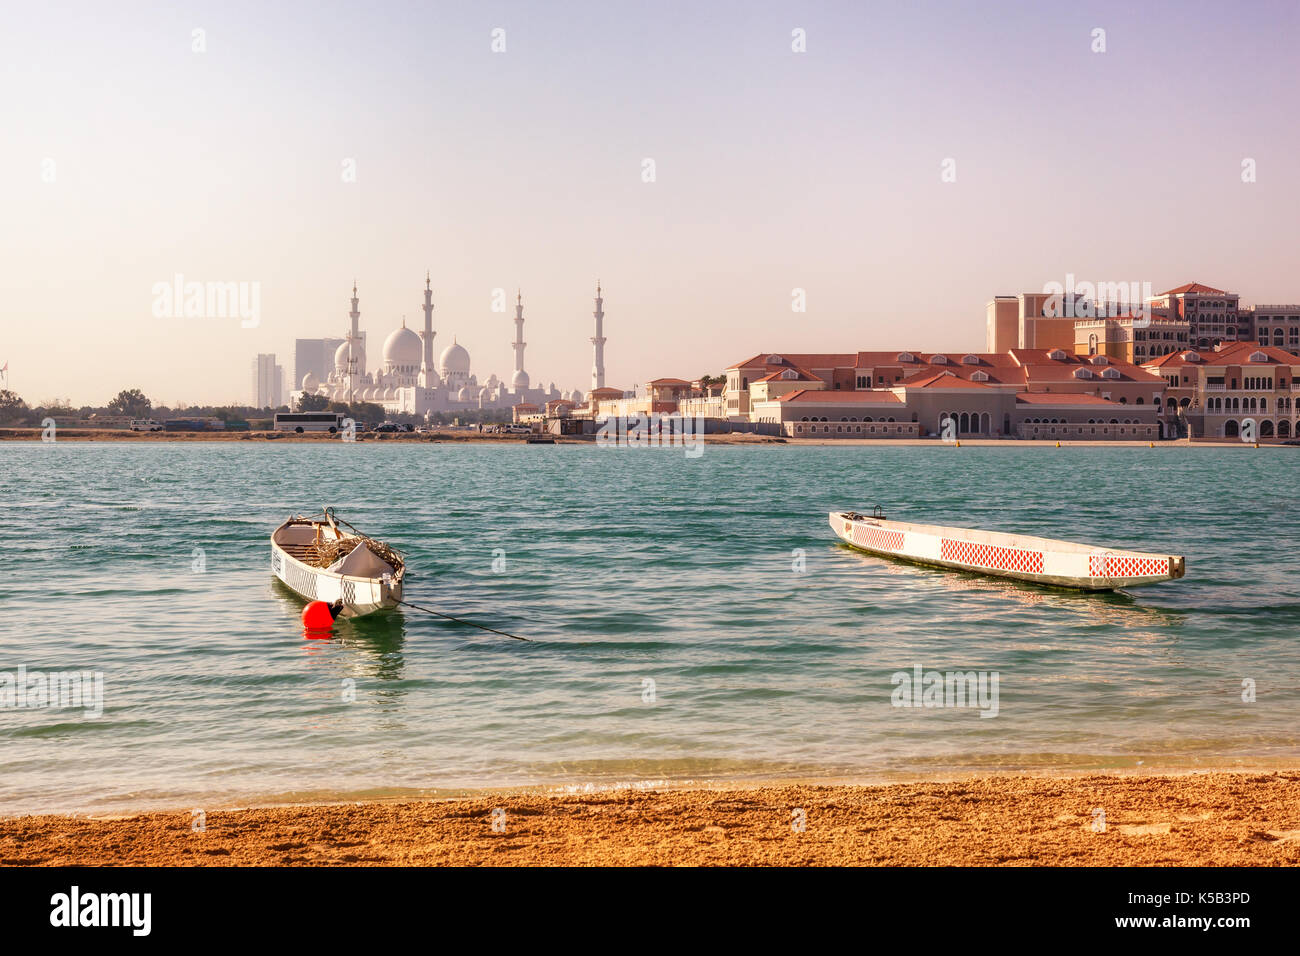 Exterior view of Grand Mosque  across the  sea, also called Sheikh Zayed Grand Mosque in Abu Dhabi, UAE Stock Photo